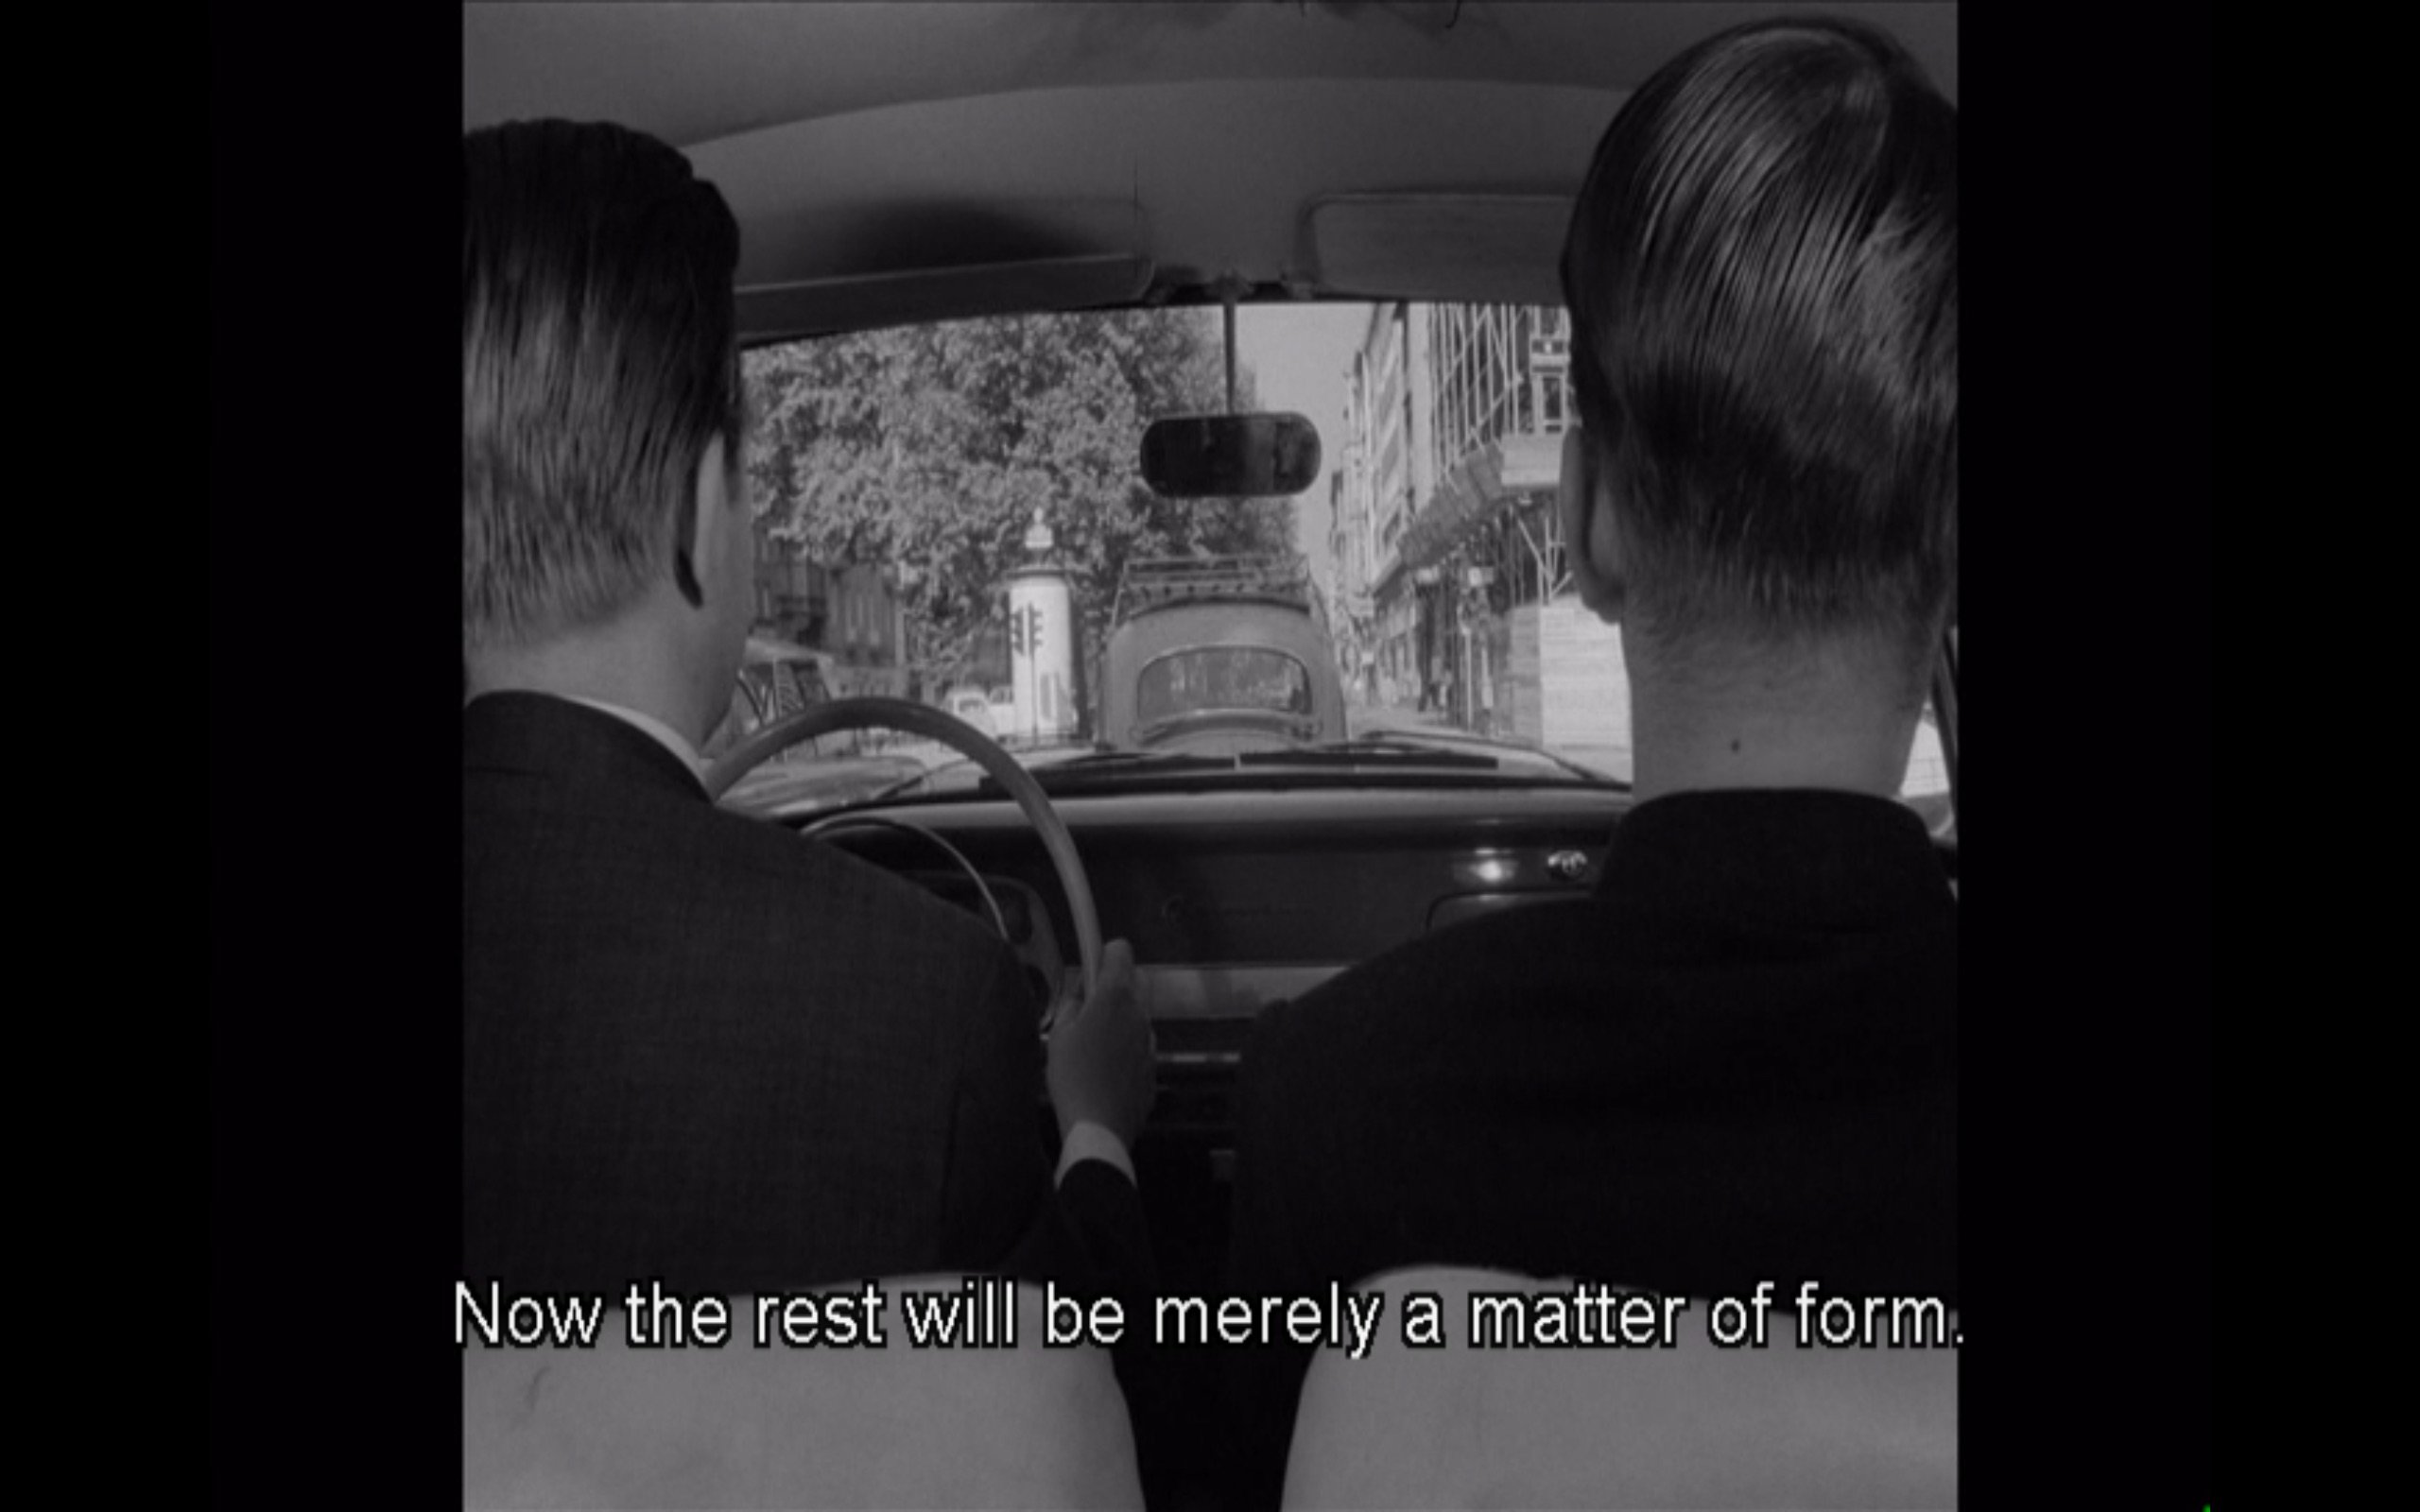 Backs of two men in the front seats of a car, viewed from the backseat. heavily masked by black bars on both sides. The caption on the bottom writes “Now the rest will be merely a matter of form.” 